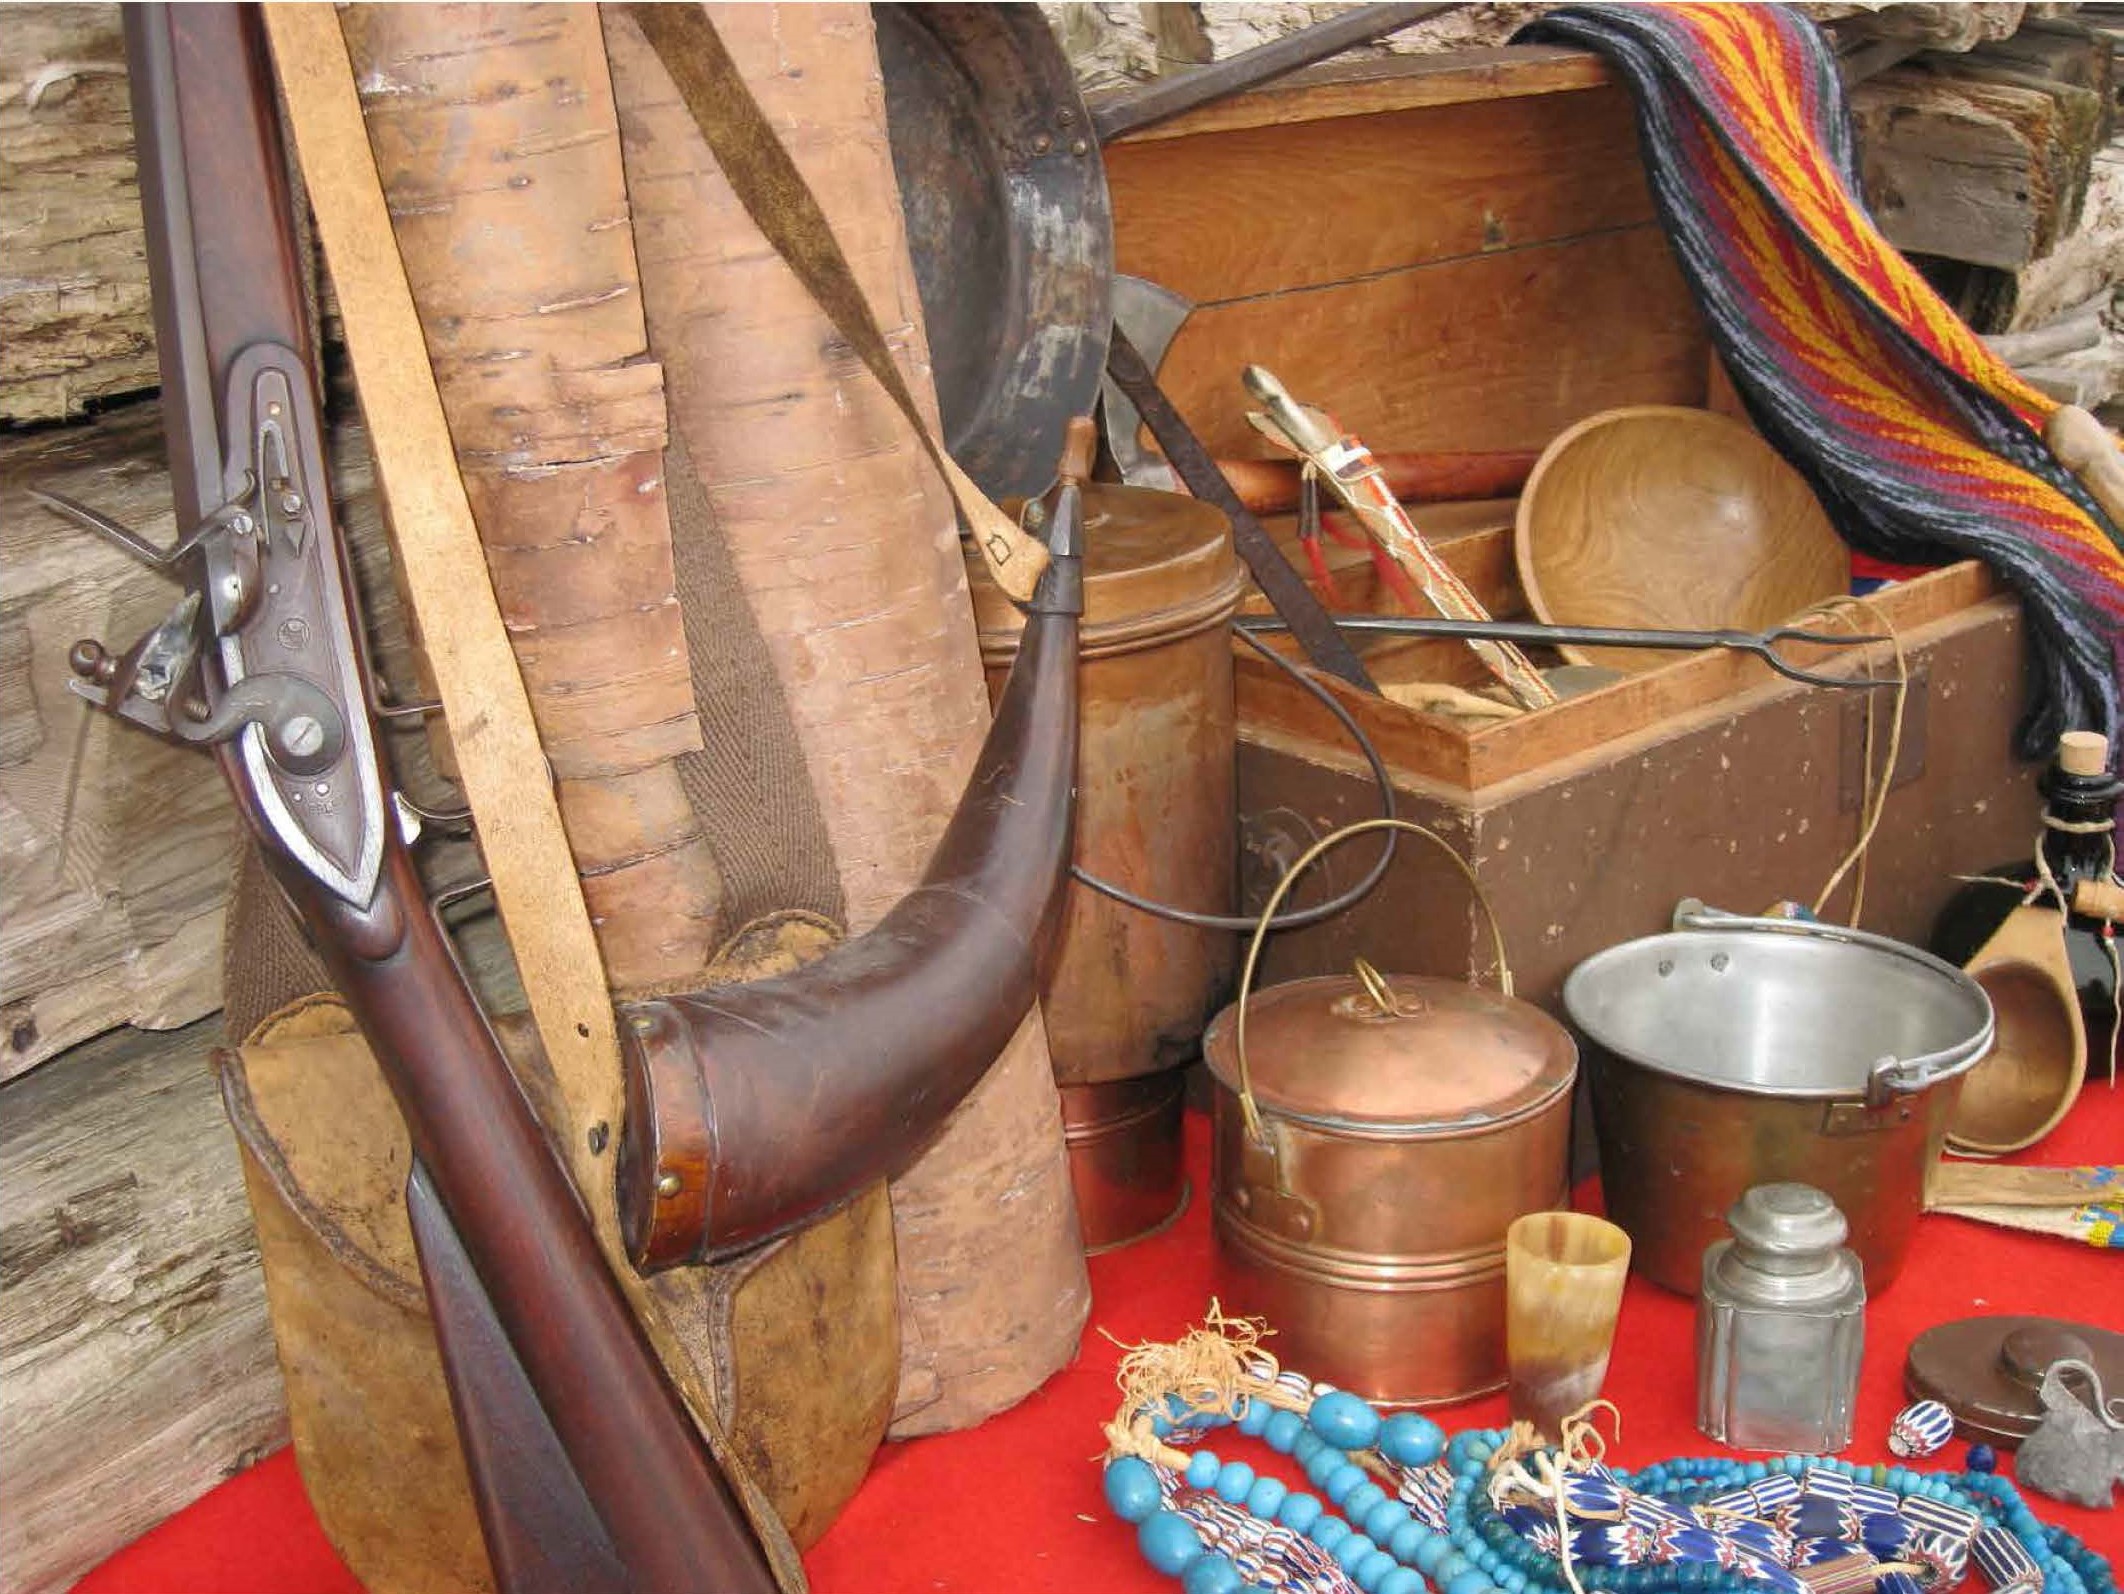 Examples of First Nations items